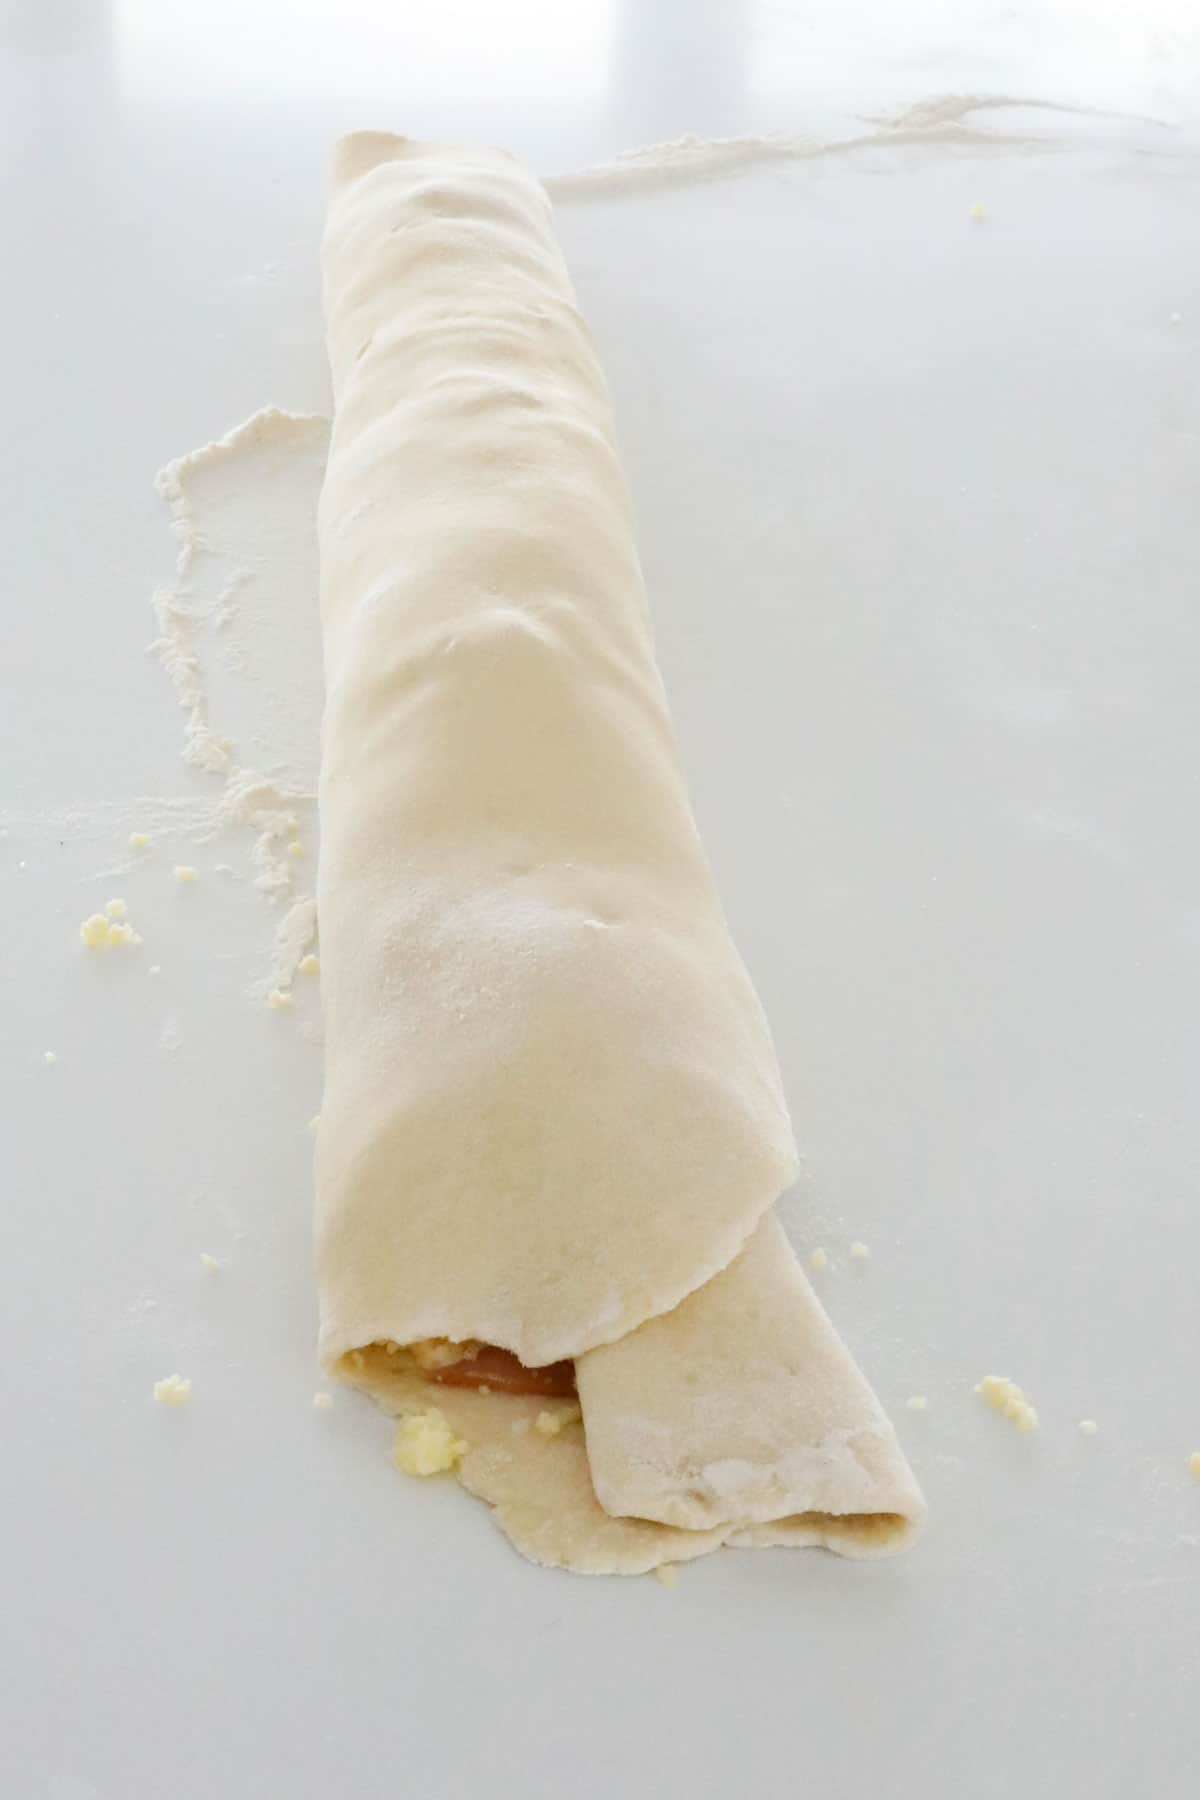 A rolled up tube of dough.